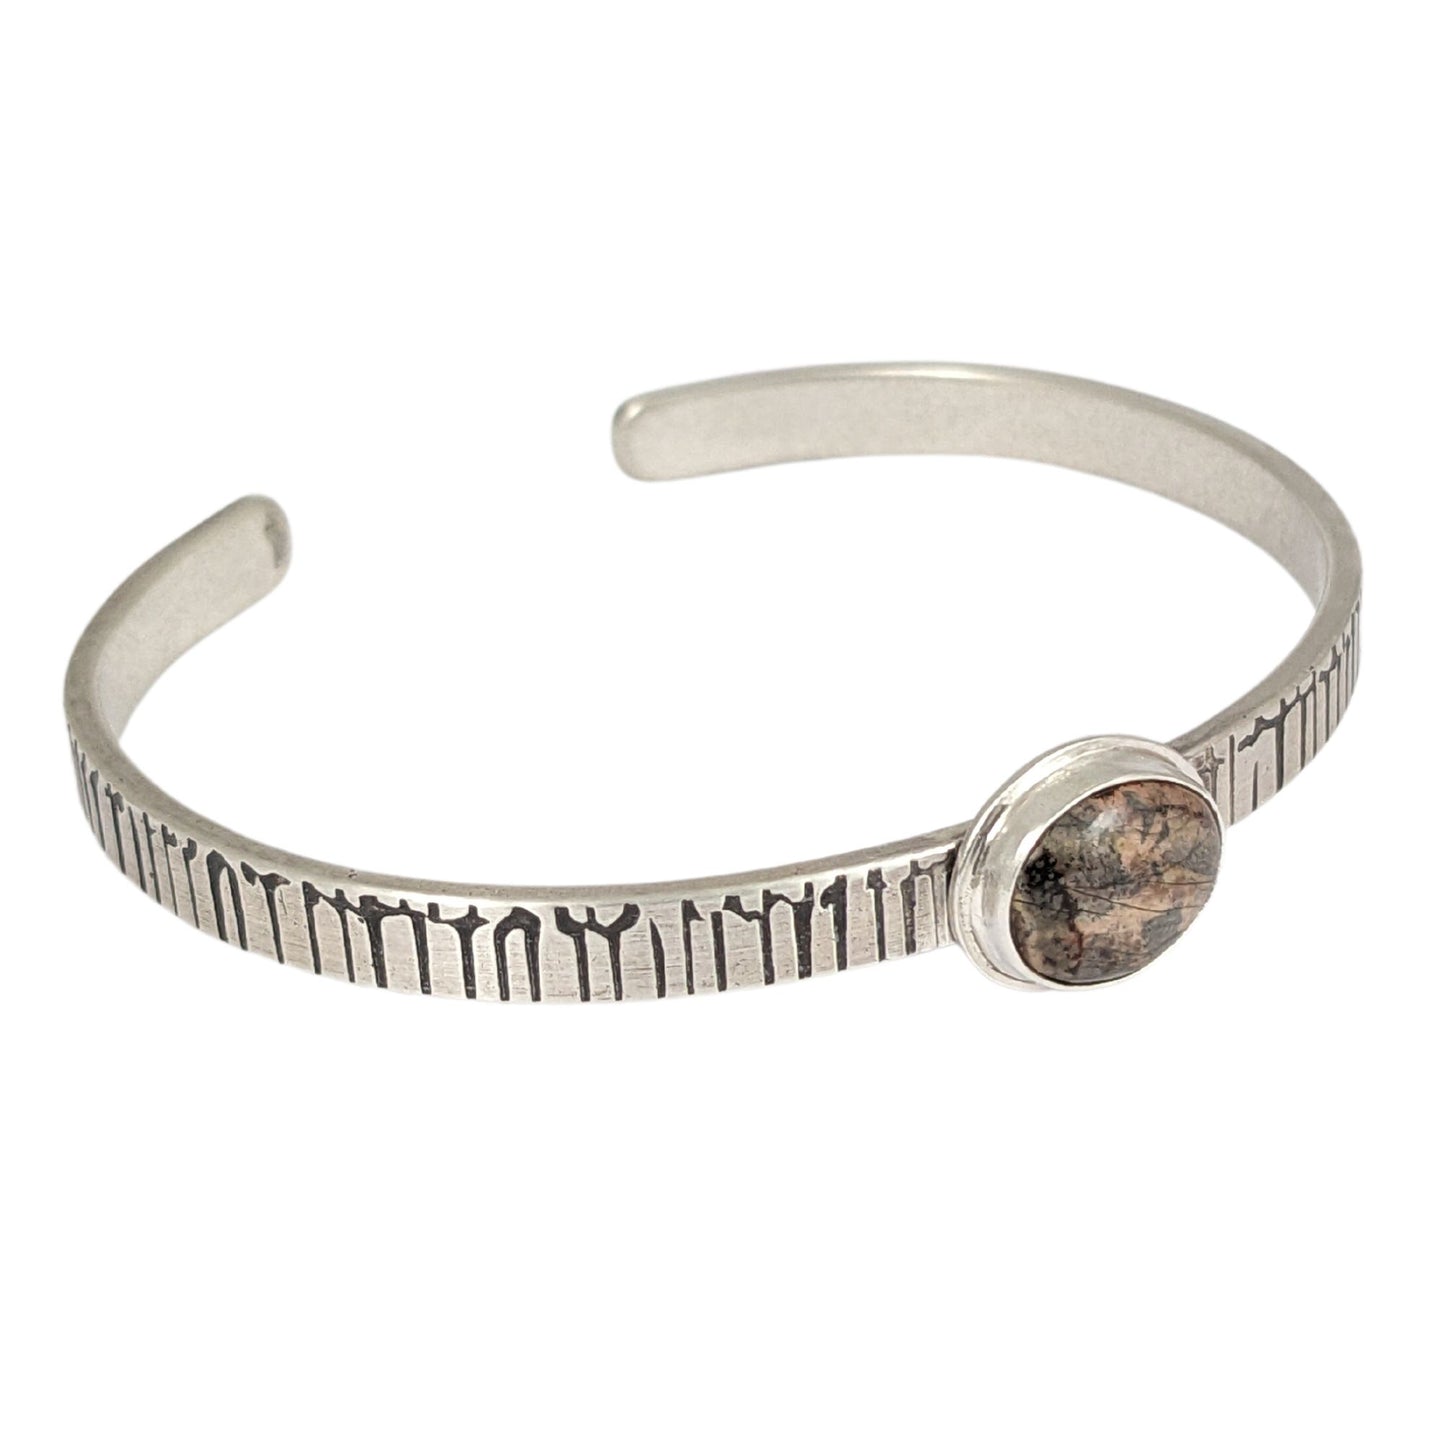 A stone in muted shades of pink, gray, and brown set on a narrow rectangular shaped sterling silver cuff bracelet. The cuff has a design that looks like an earthquake seismograph chart.